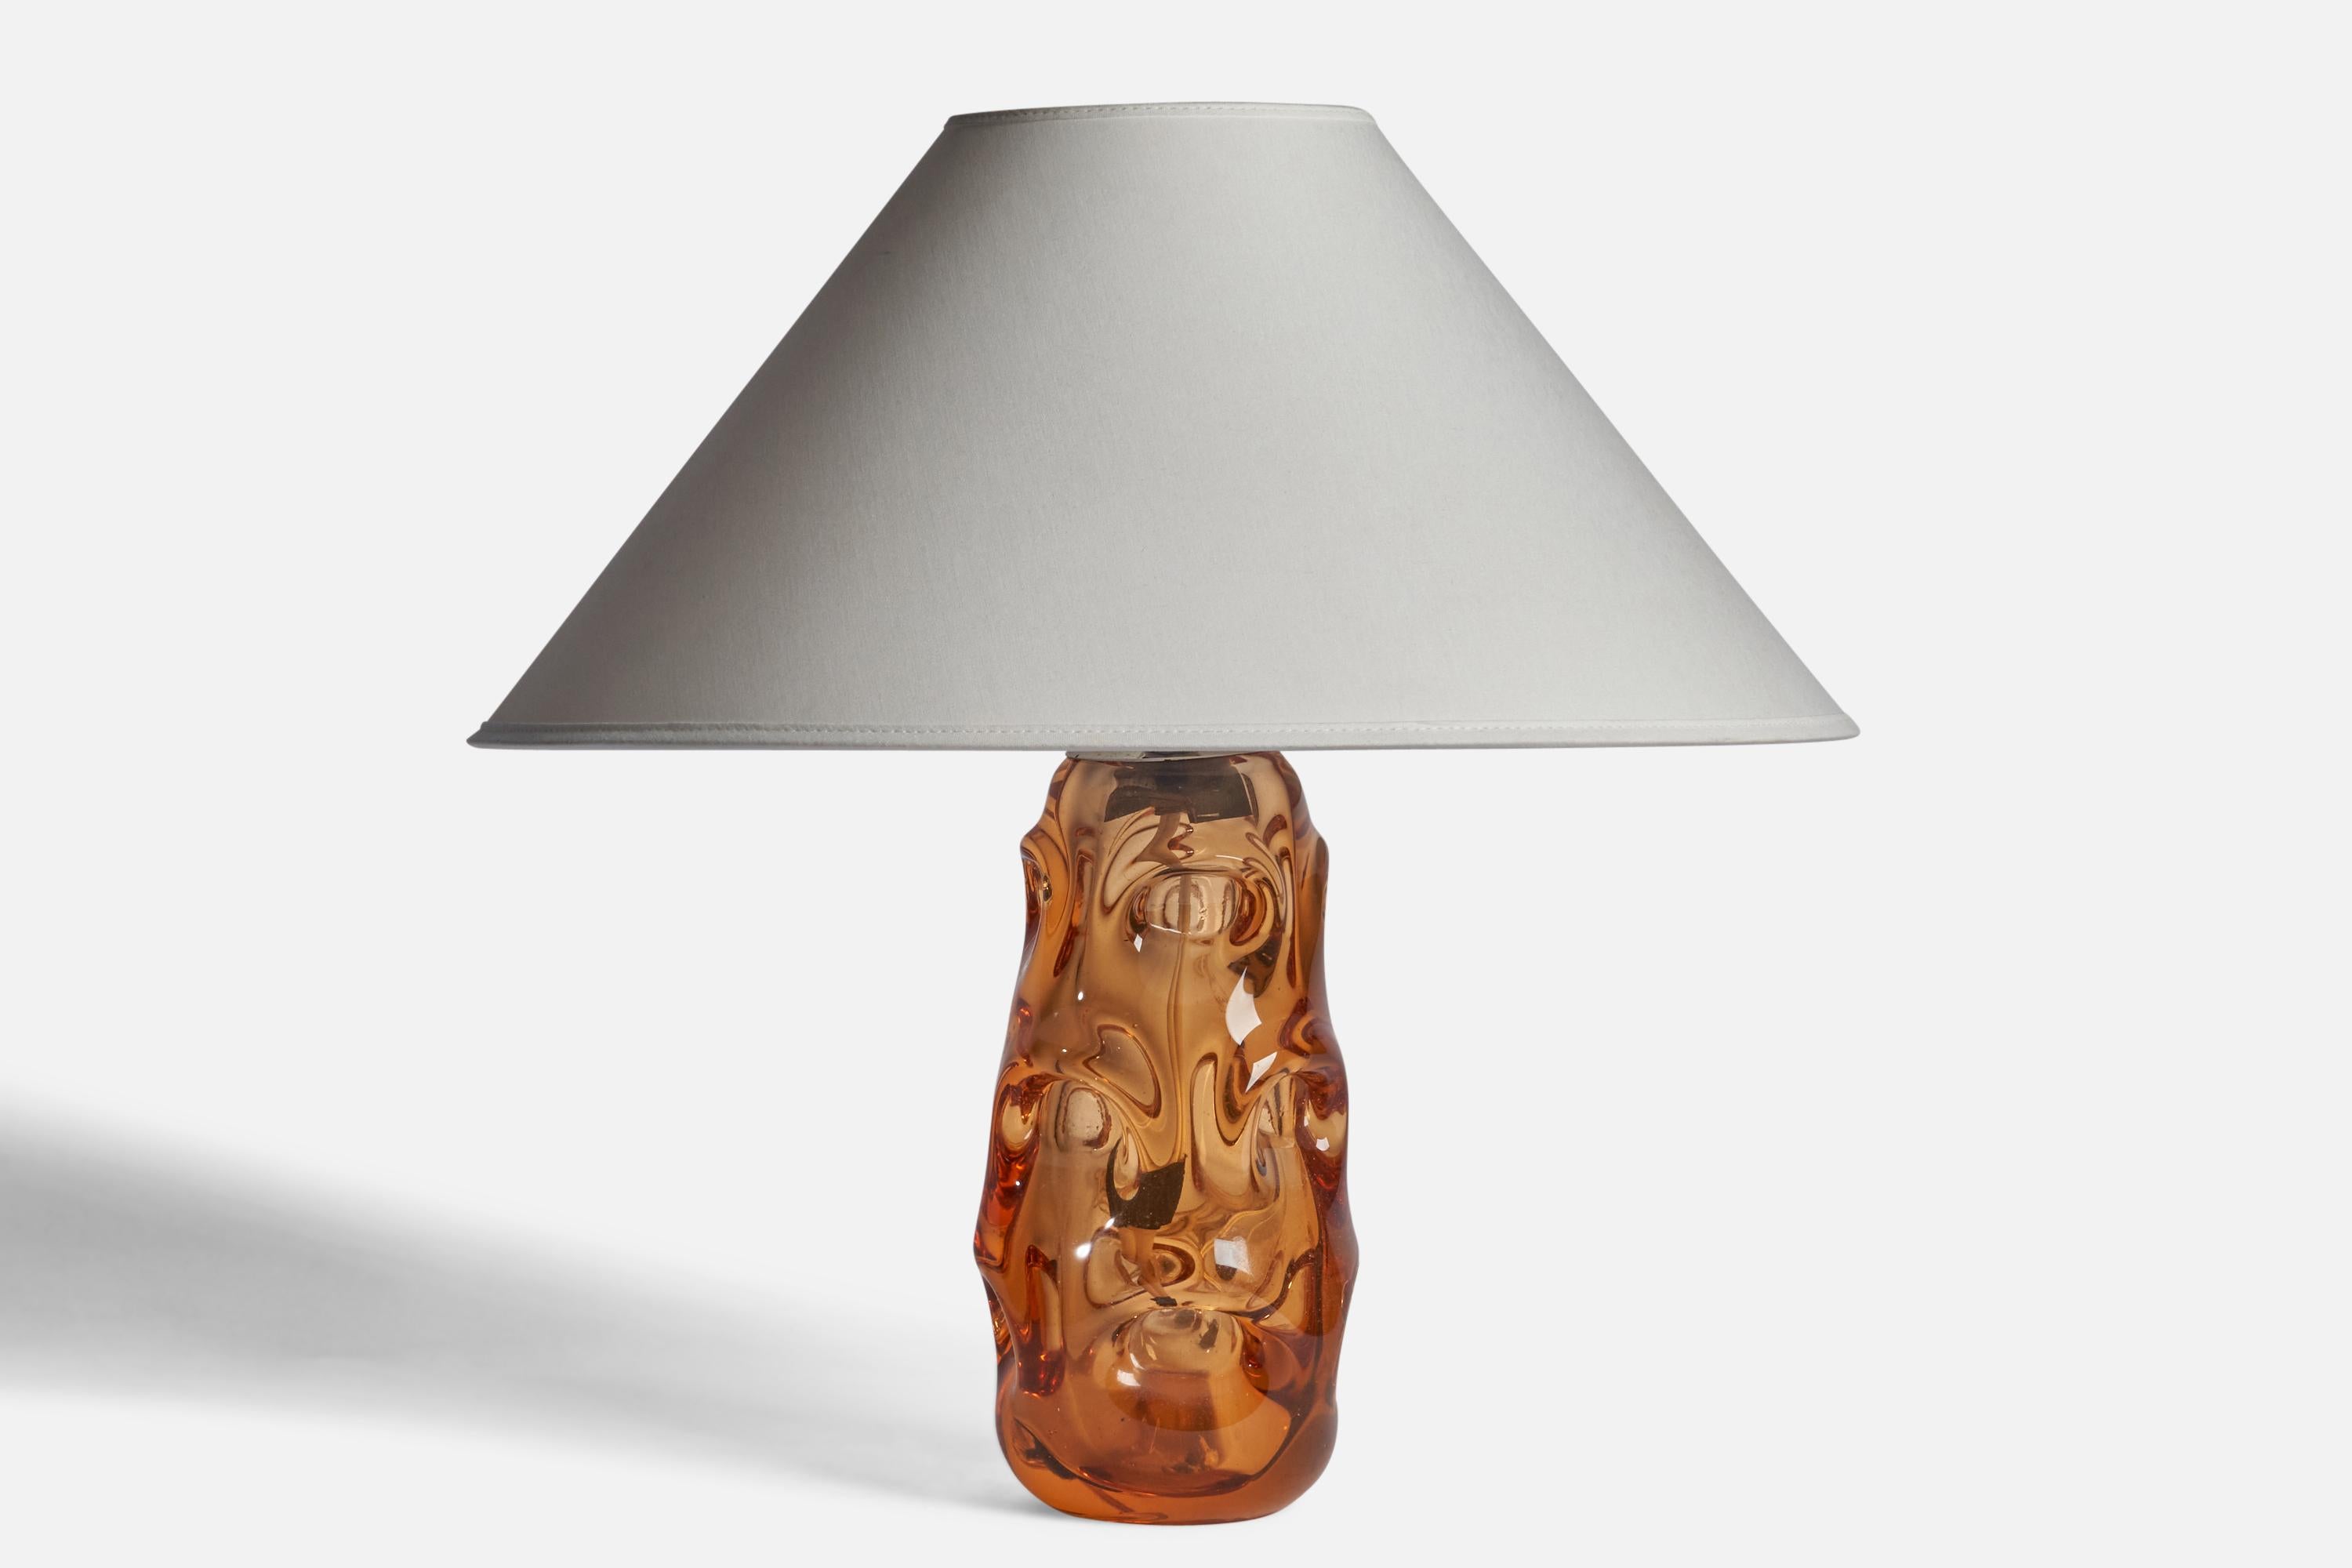 An orange-coloured blown glass table lamp designed by Börne Augustsson and produced by Åseda Glasbruk, Sweden, 1940s.

Dimensions of Lamp (inches): 11.35” H x 4.25” Diameter
Dimensions of Shade (inches): 4.5” Top Diameter x 16” Bottom Diameter x